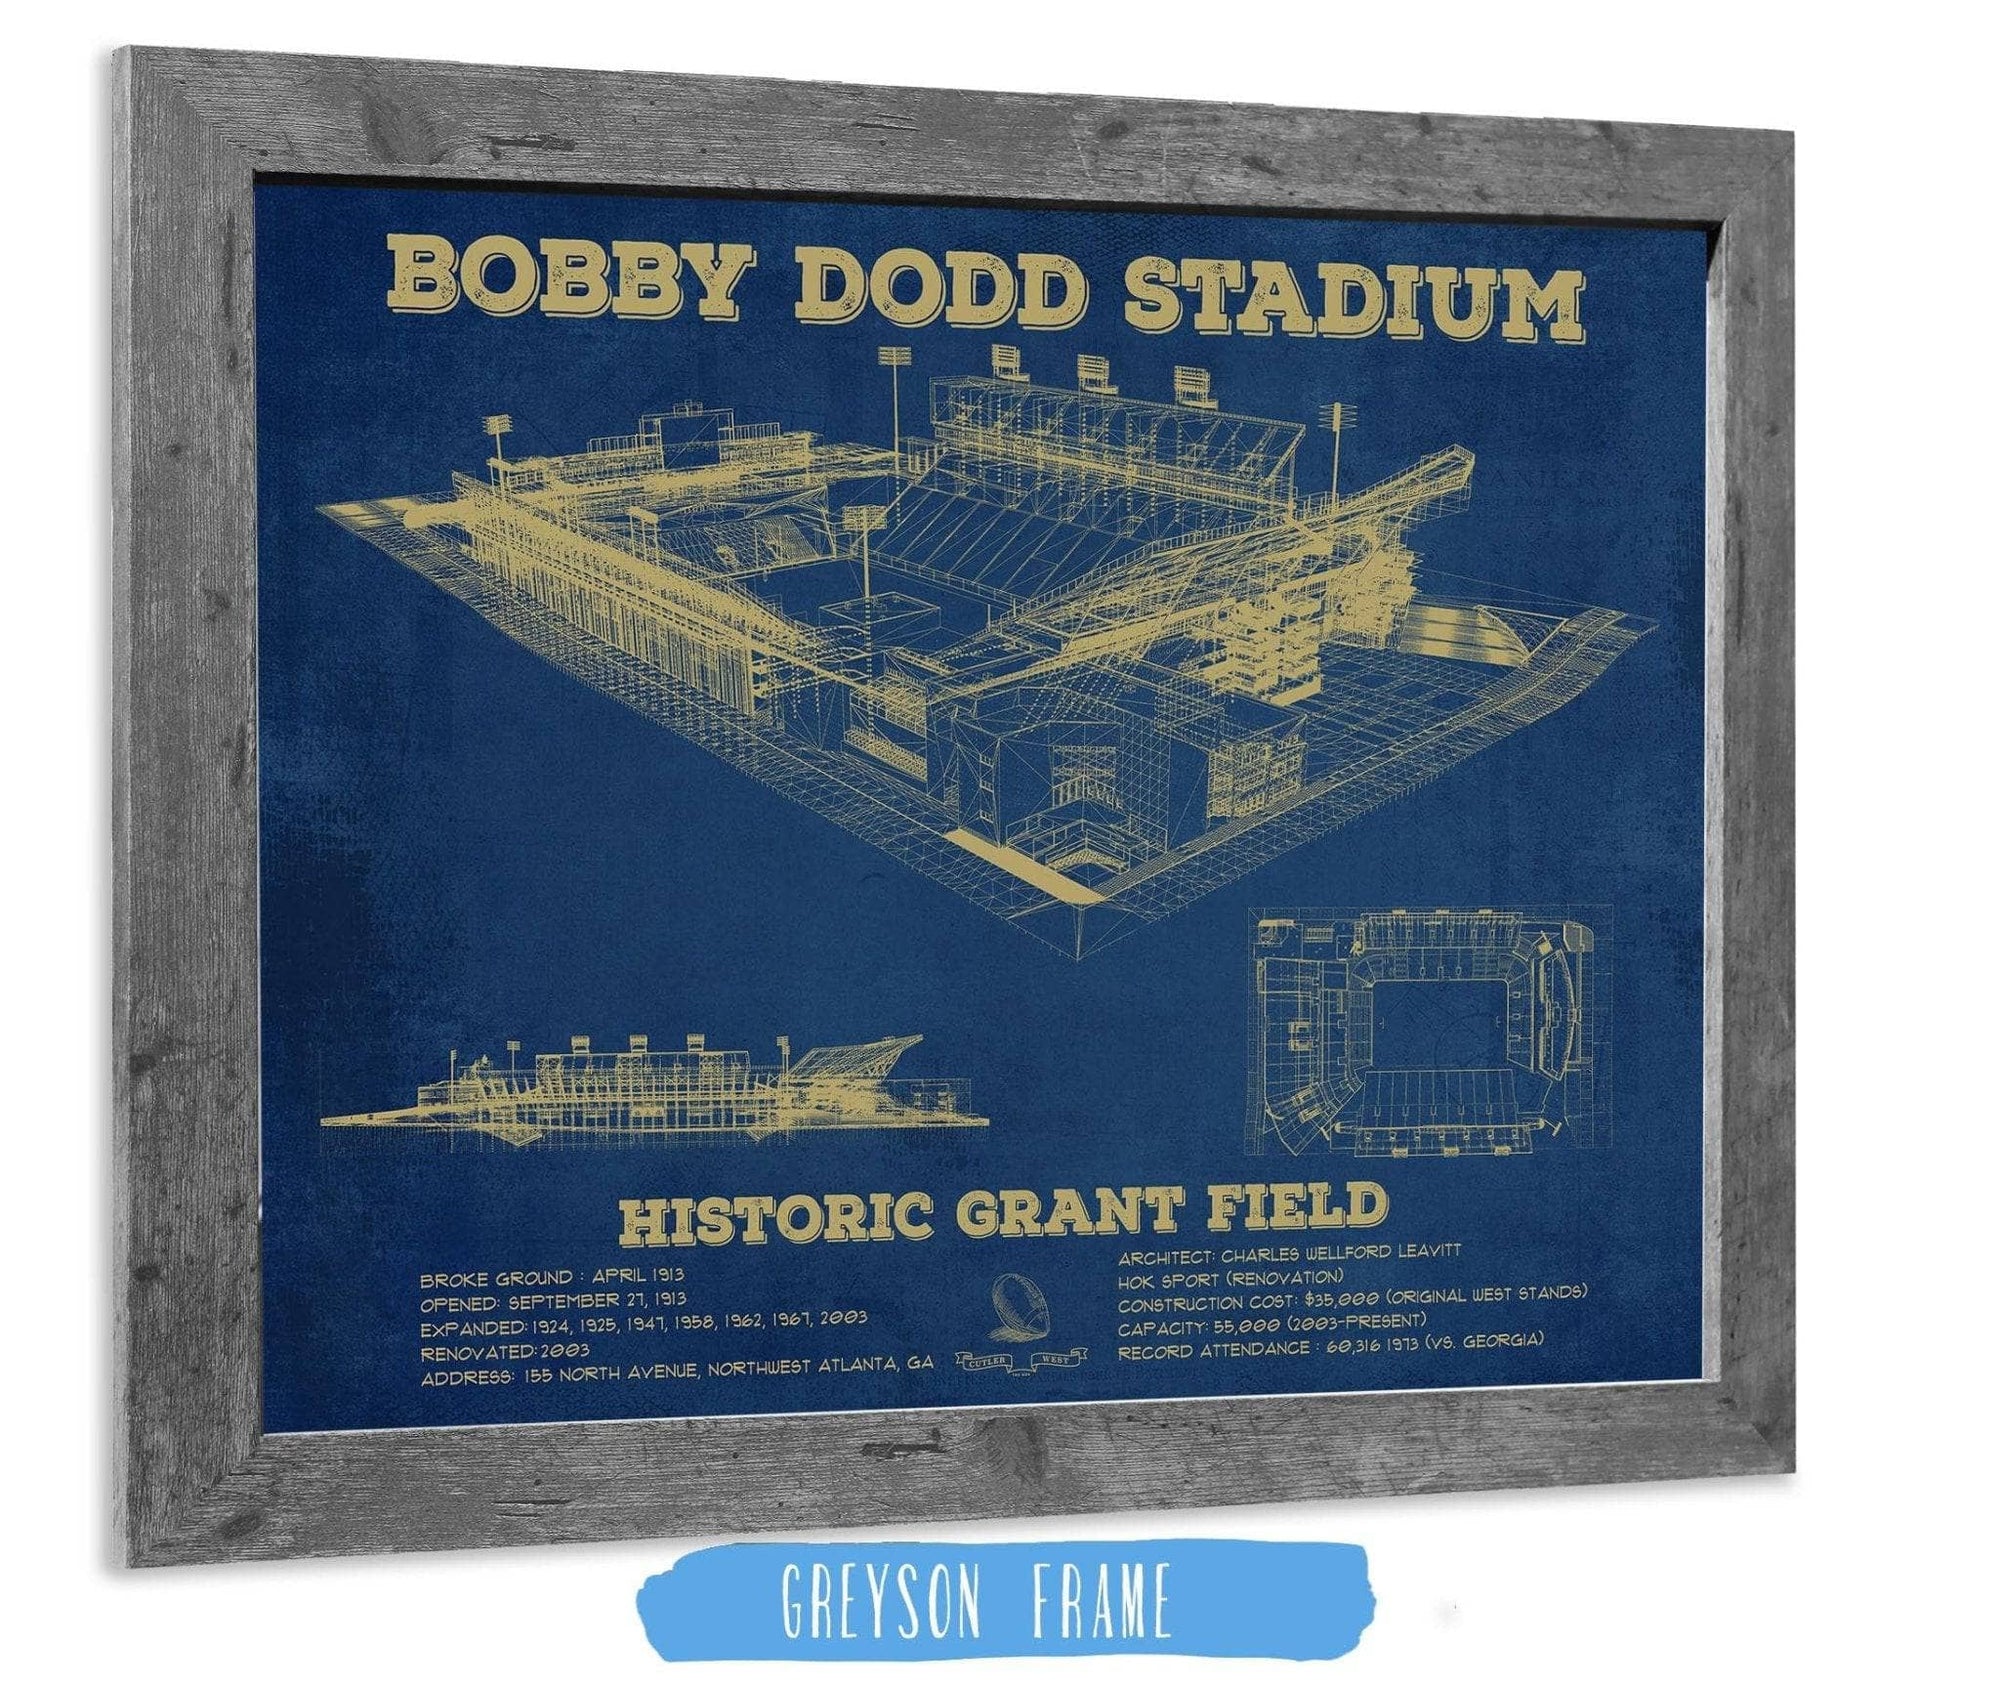 Cutler West College Football Collection 14" x 11" / Greyson Frame Georgia Tech Yellow Jackets - Bobby Dodd Stadium at Historic Grant Field 835000126_48678